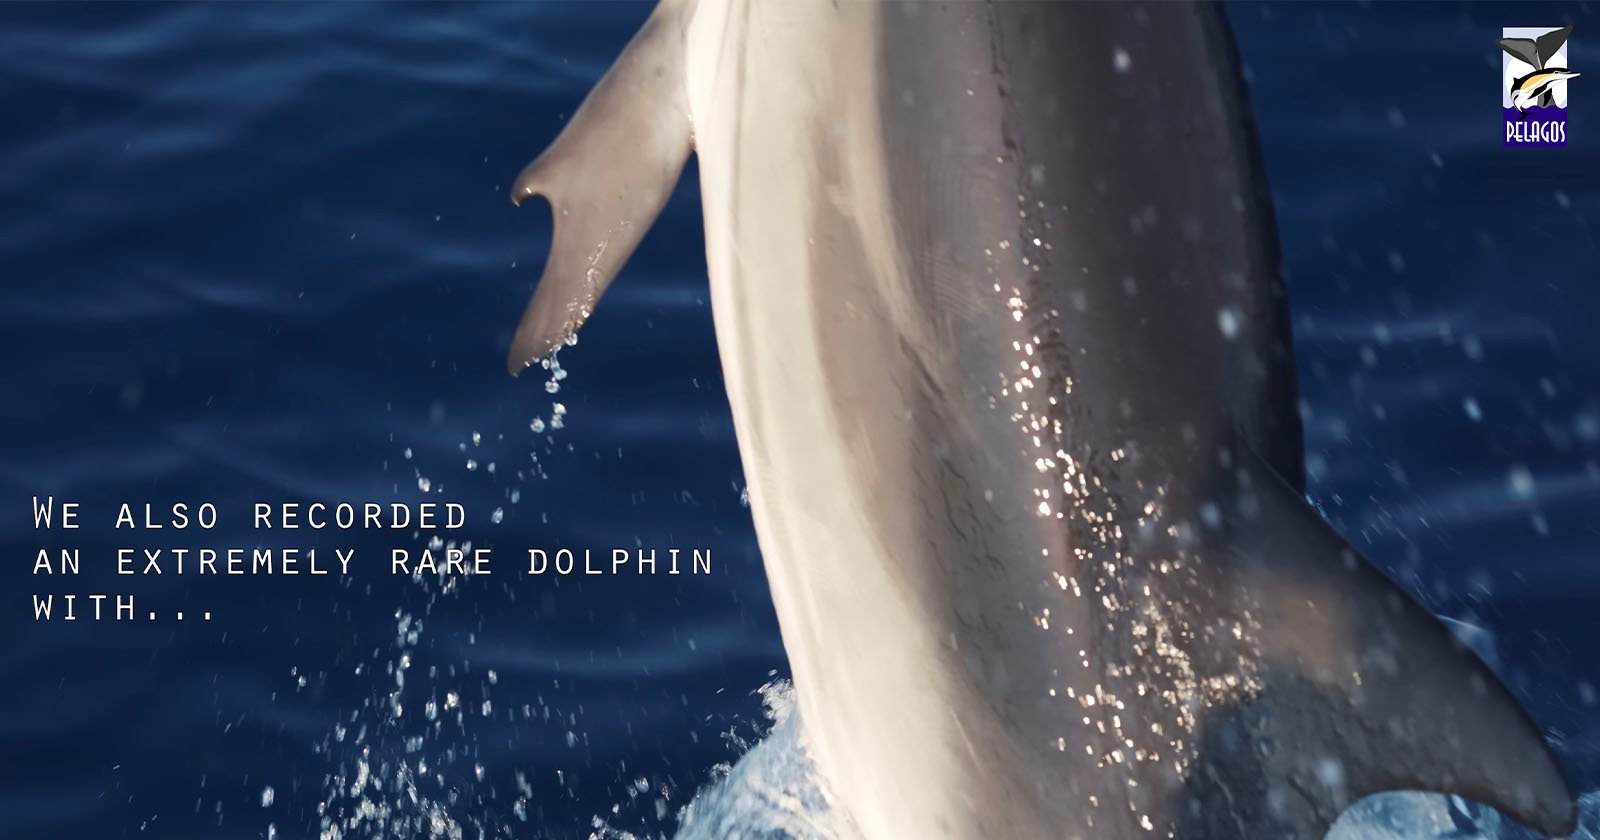 Footage Captures Extremely Rare Dolphin with Thumbs